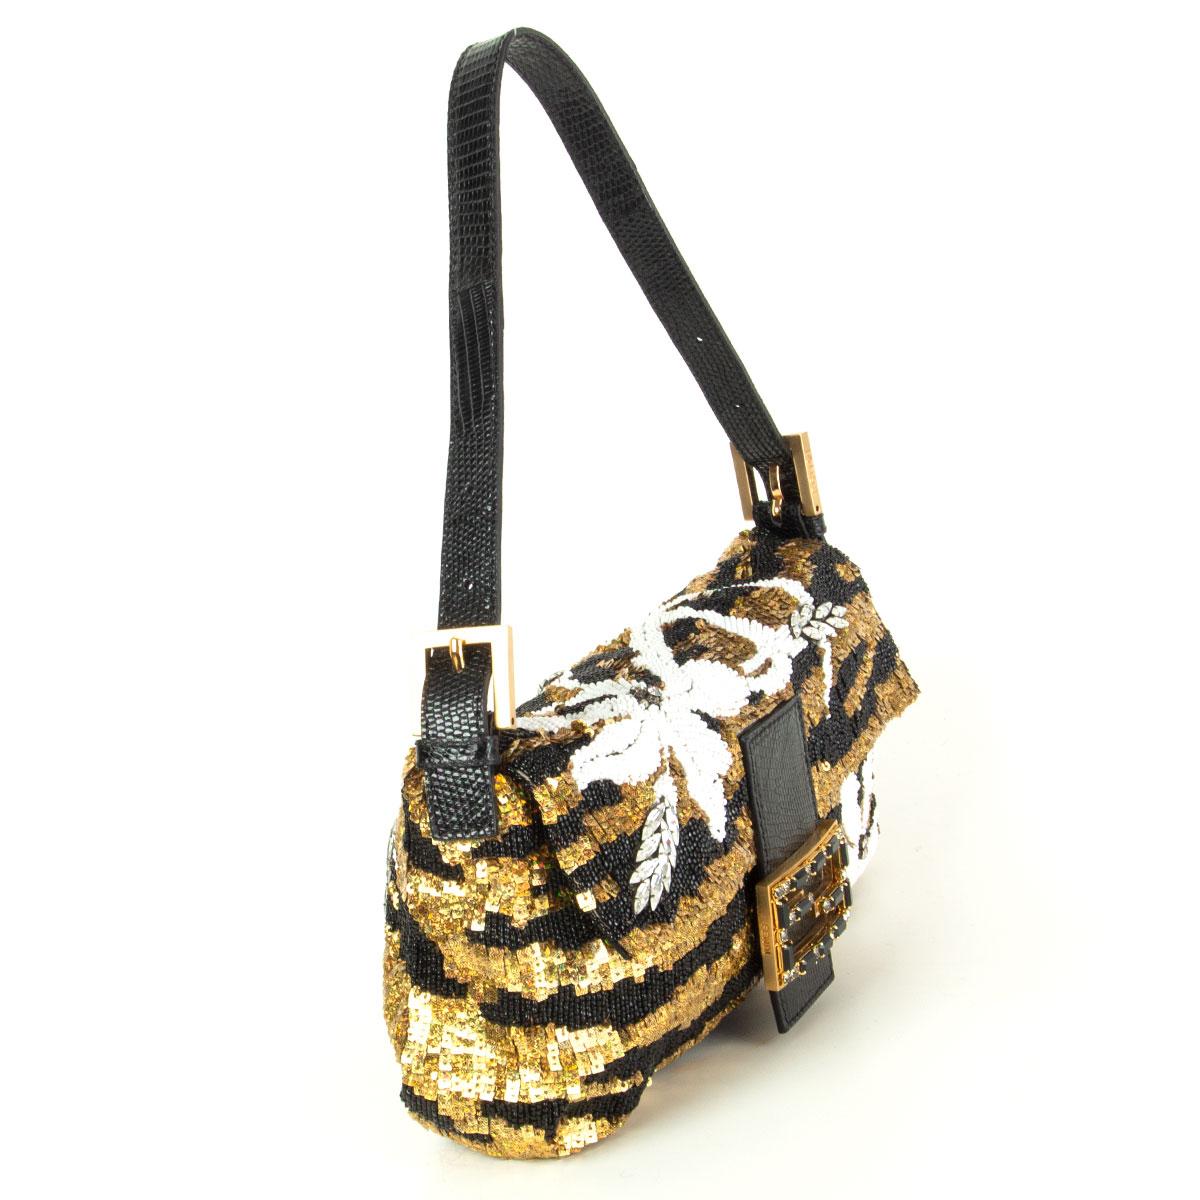 Fendi 'Mini Baguette' in black gold sequins with white beading featuring black lizard buckle and shoulder strap. The FF buckle and leaves are embellished with black and clear crystals. Lined in black satin silk with one zipper pocket against the